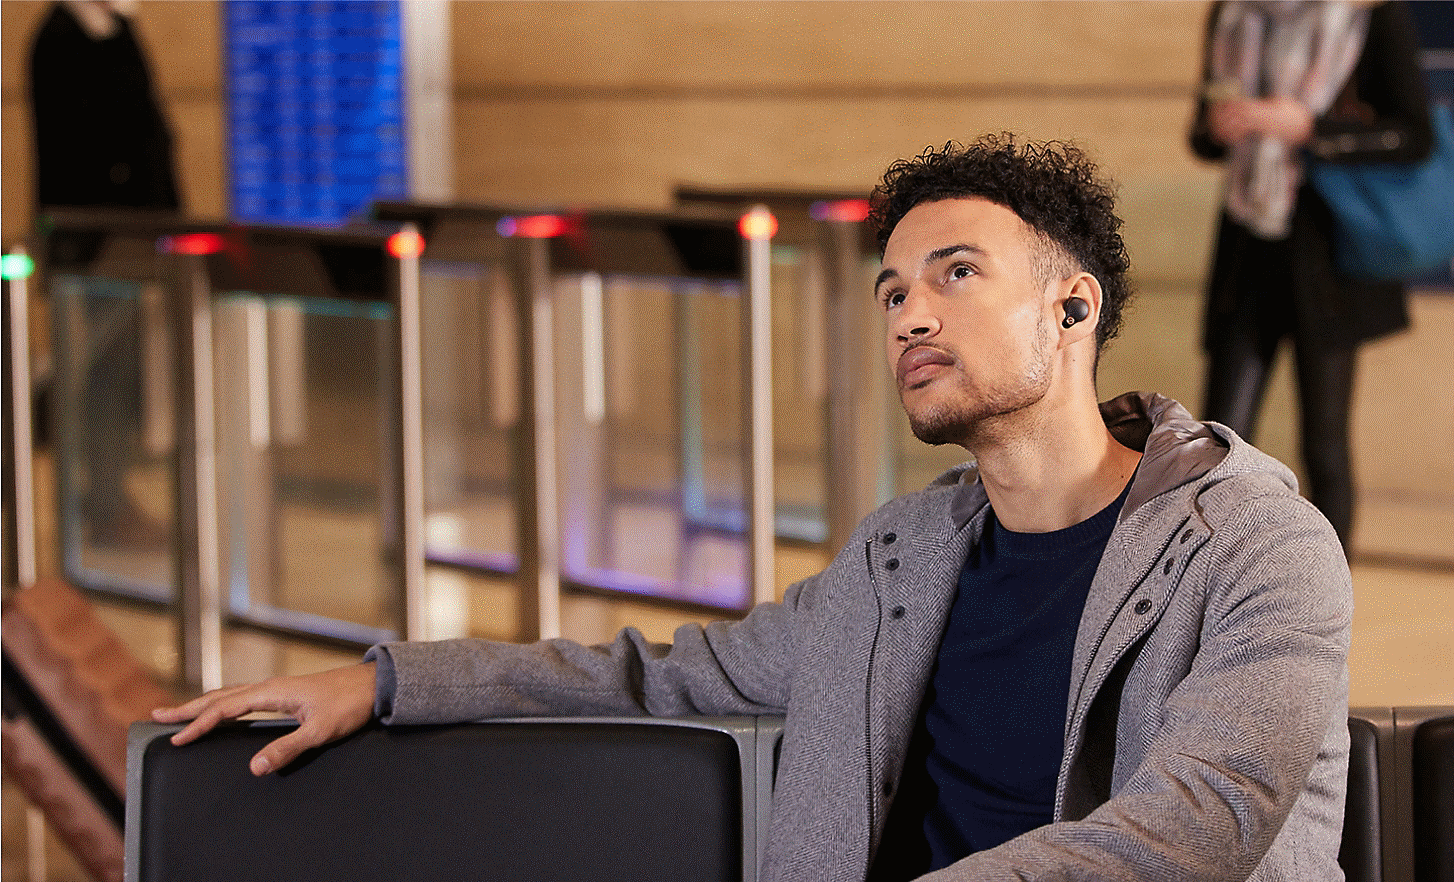 A man waiting on a bench at a station, wearing WF-1000XM4 headphones